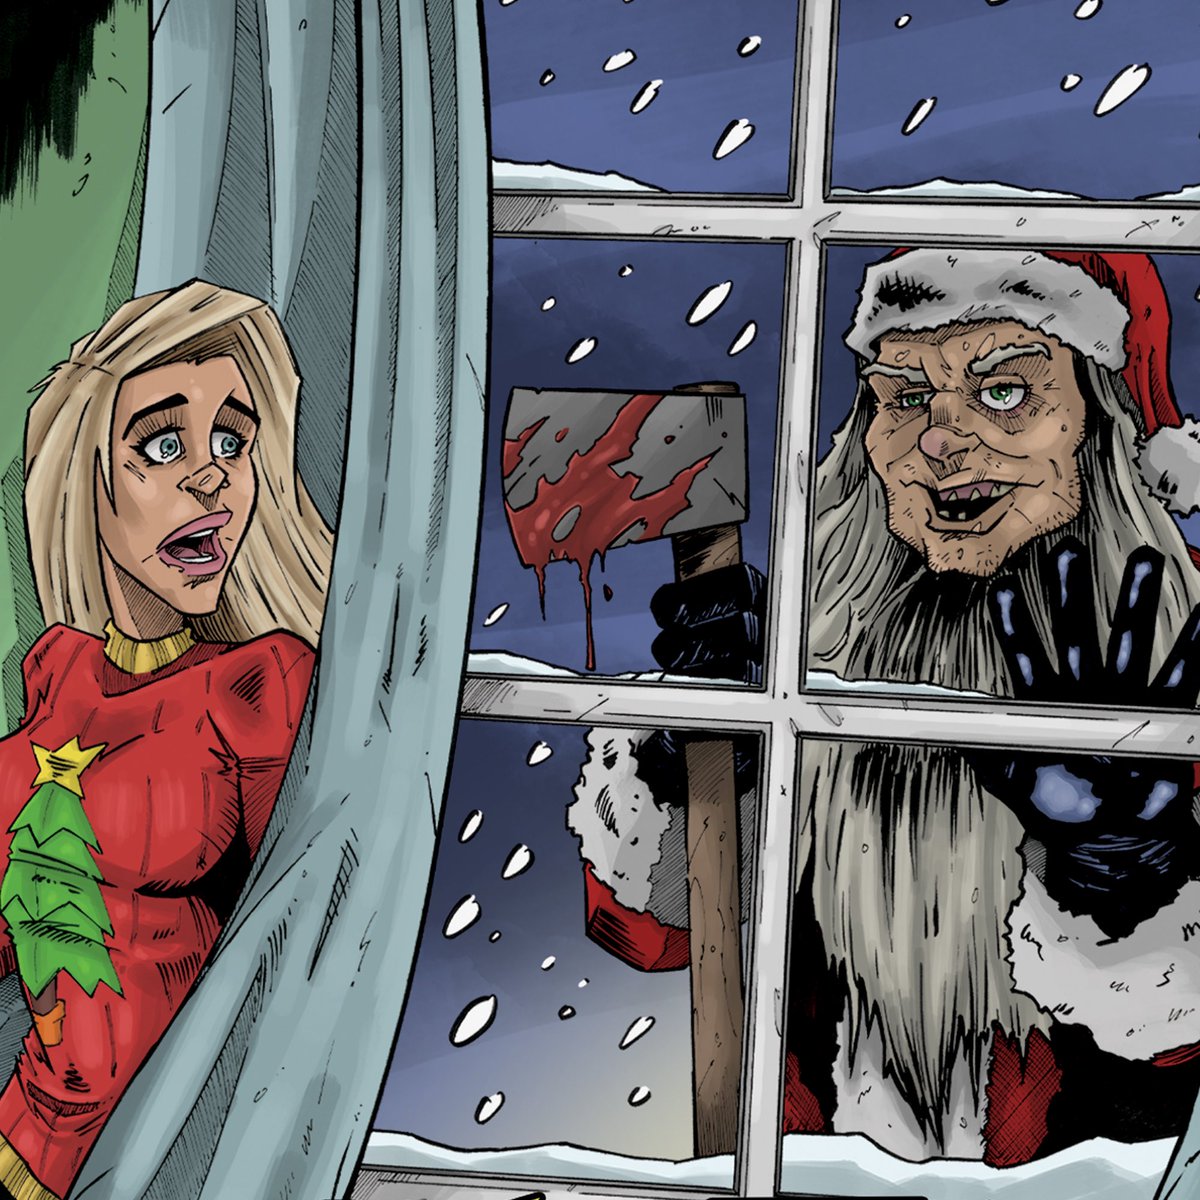 HEY! This slasher Santa wants you to have a very merry Christmas! NEW horror Christmas cards available over in my store. LINK etsy.com/uk/listing/155…

#horror #christmas #chistmascard #christmascards #horrorcommunity #geekcommunity